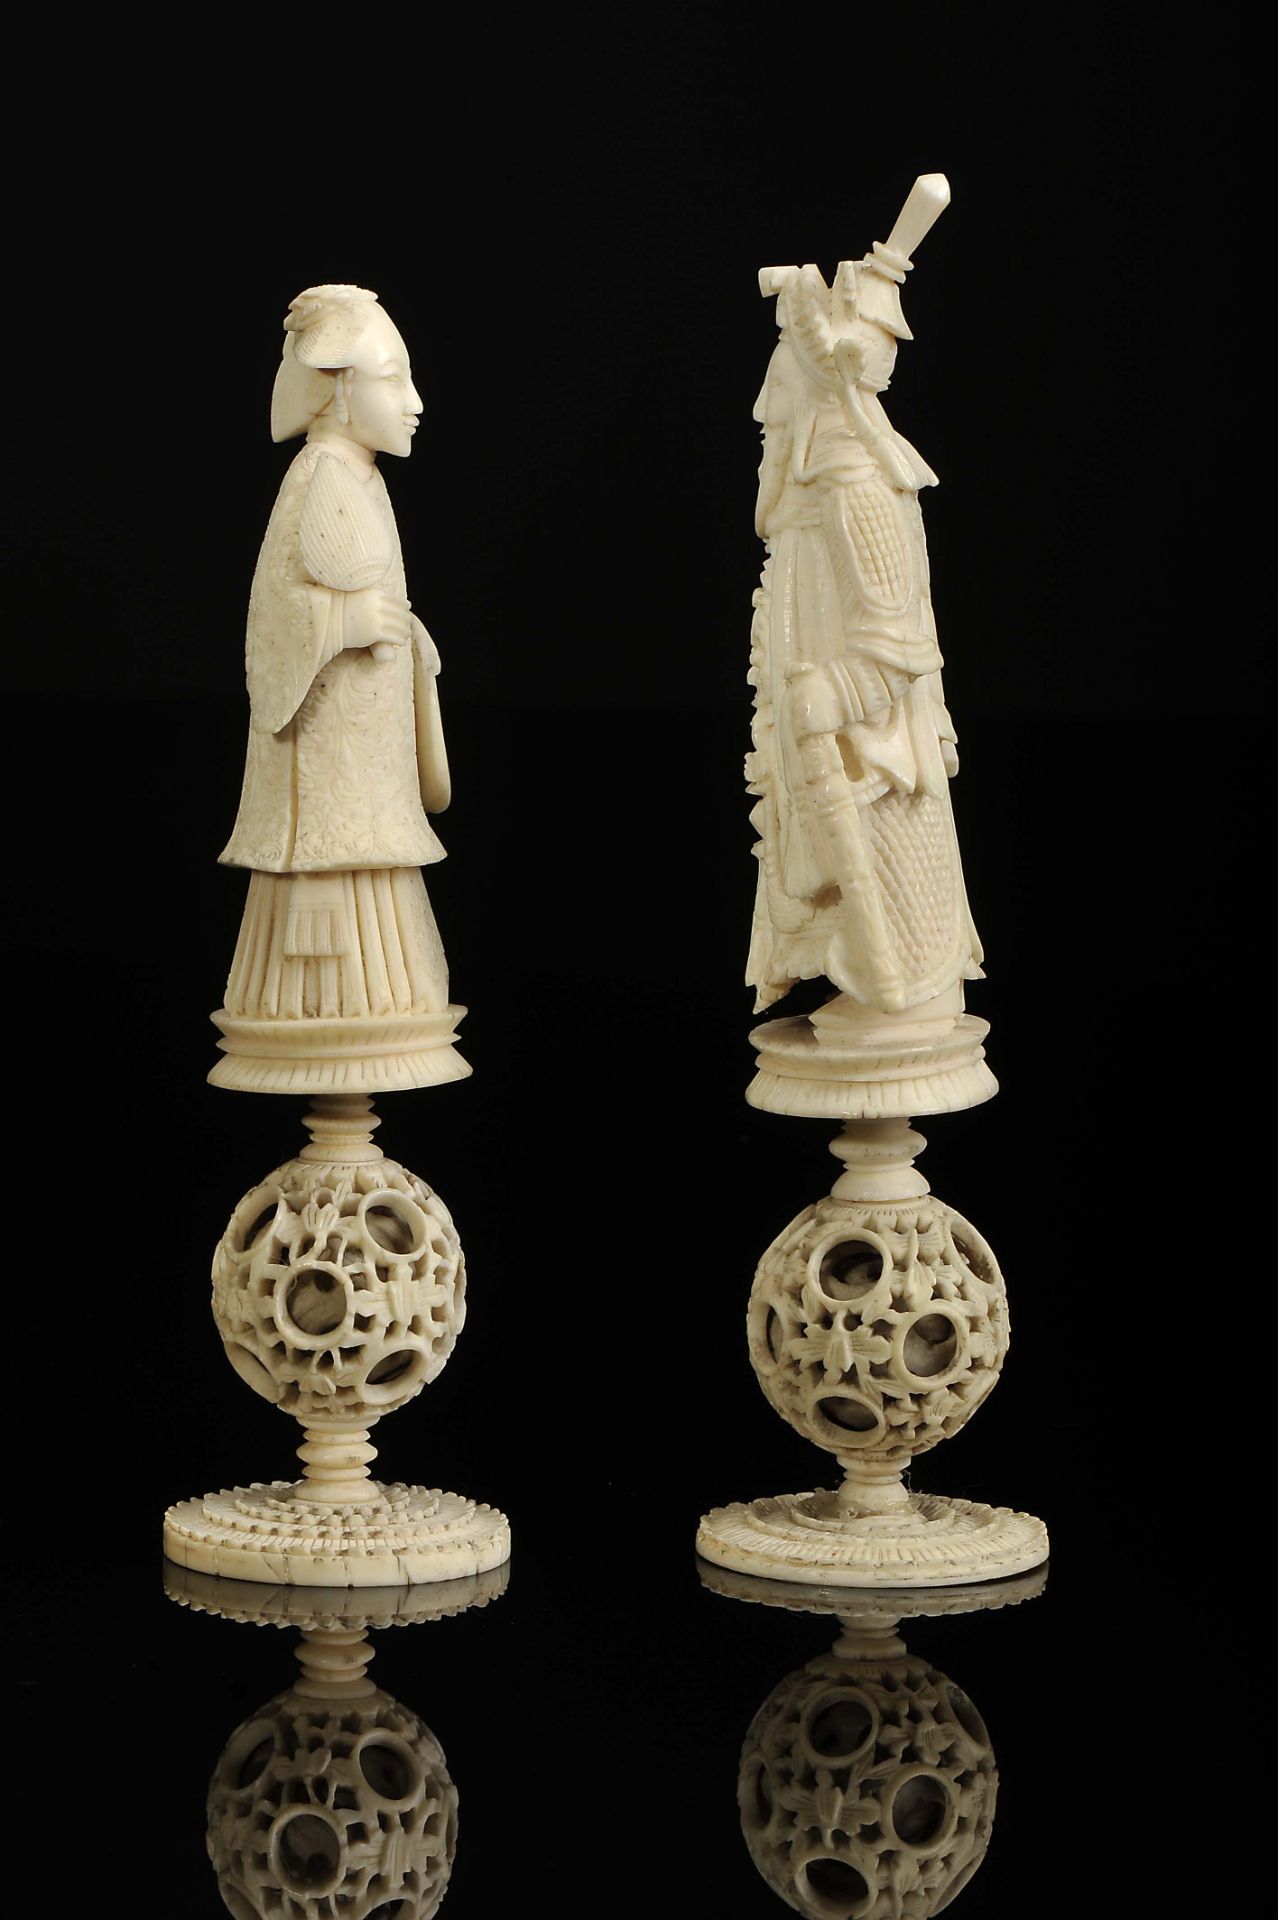 Six Chess Pieces, "Three Kings" and "Three Queens" on "Ball of happiness" - Image 6 of 7